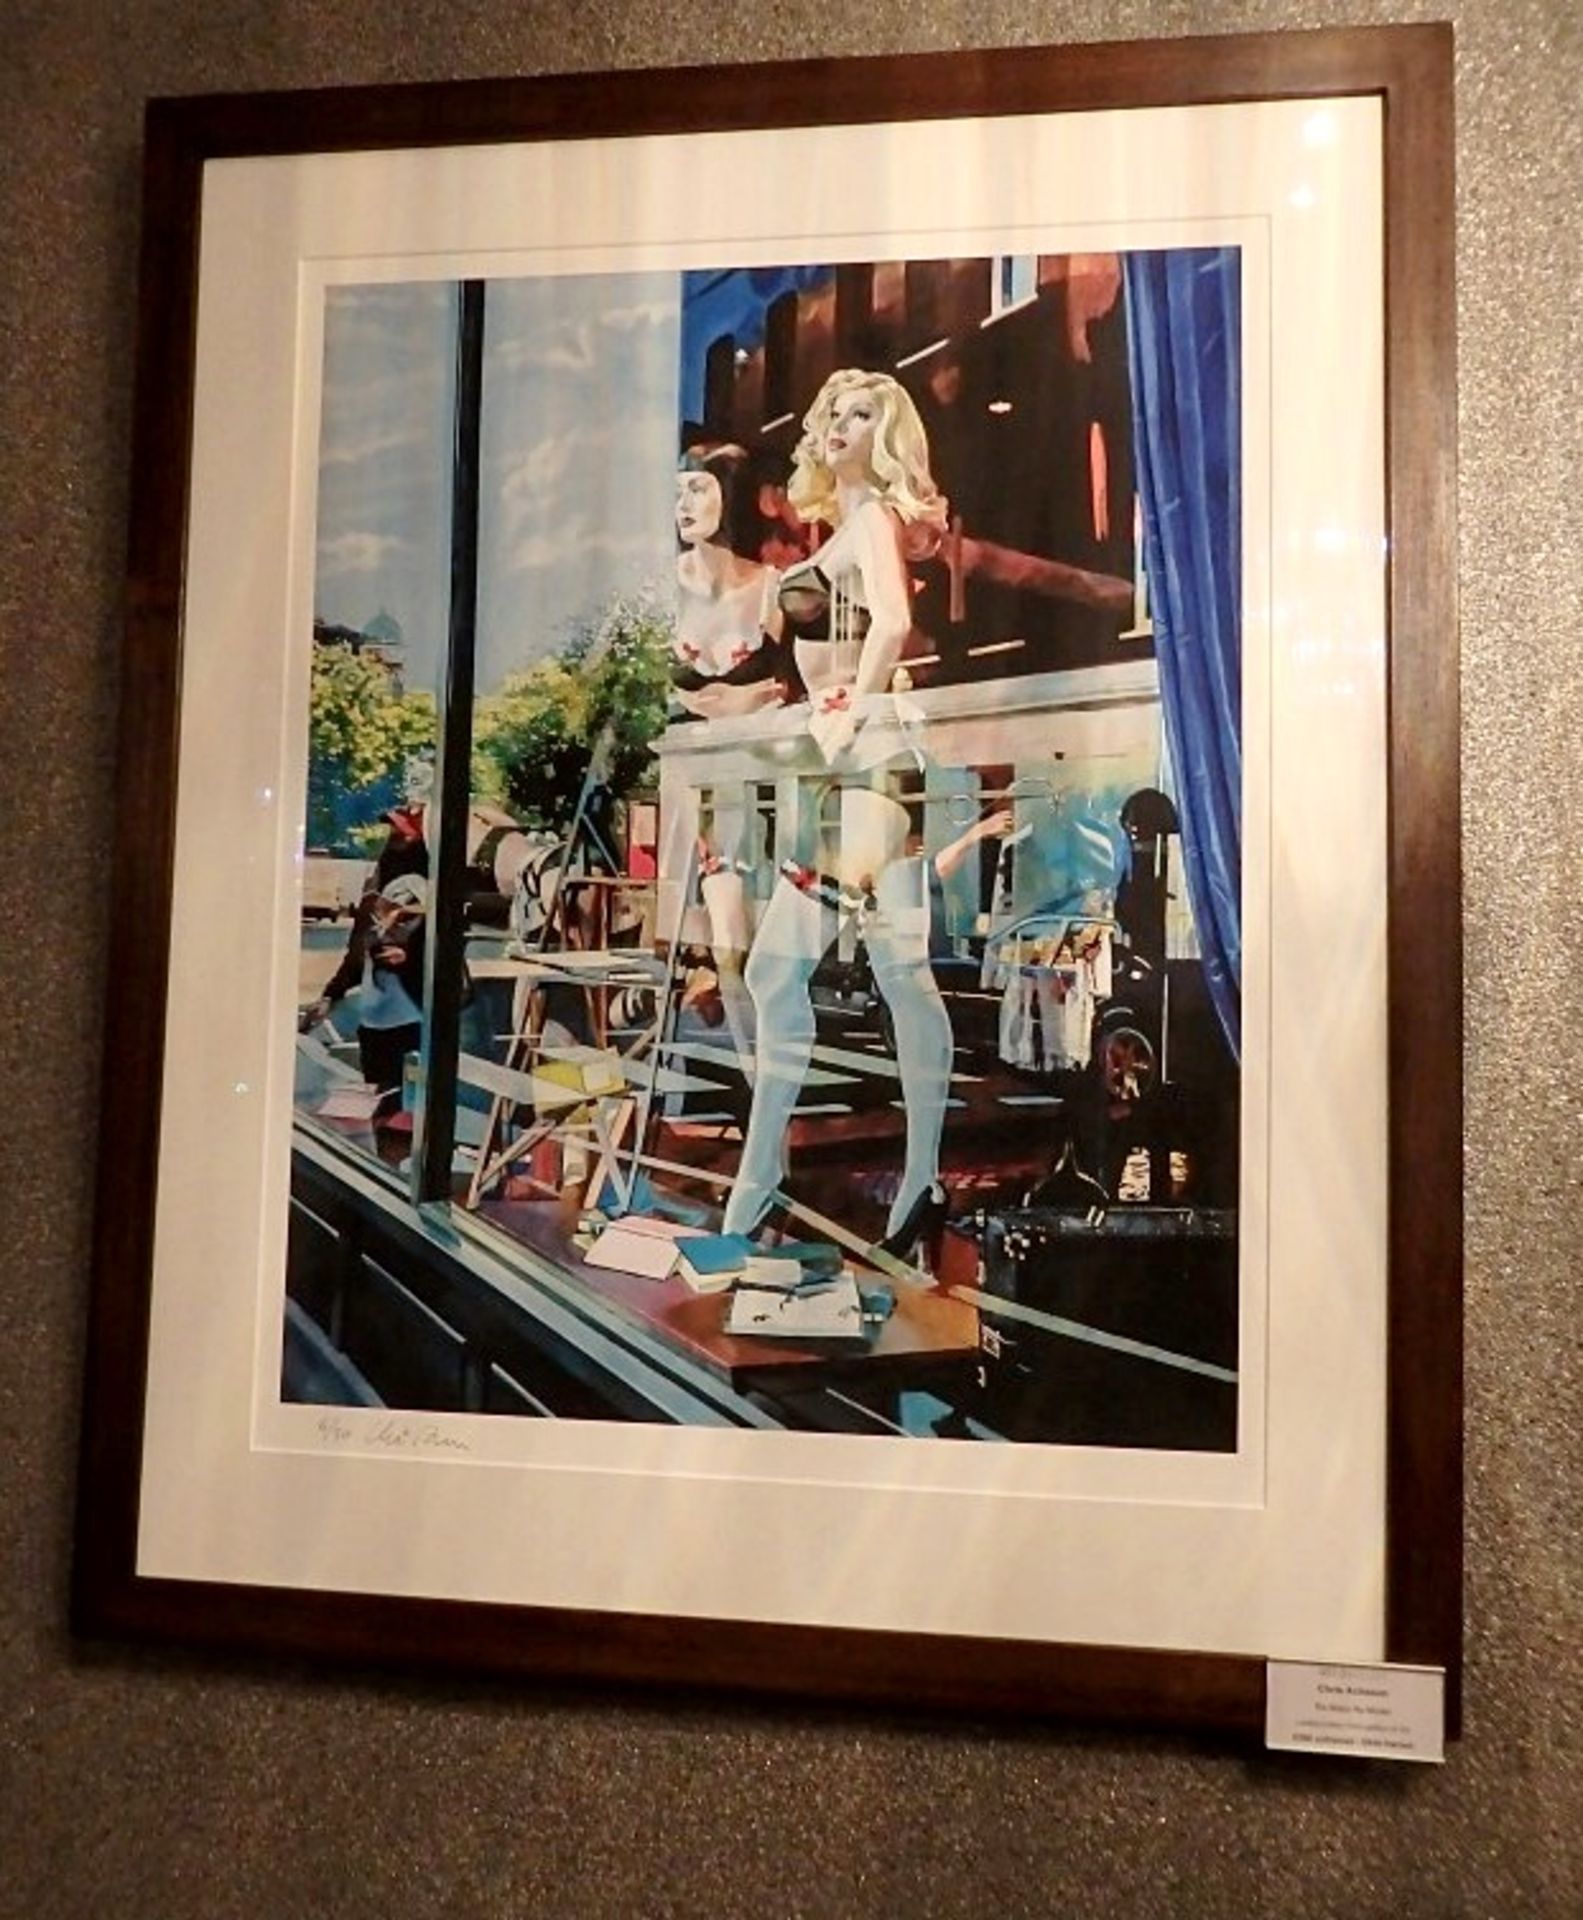 1 x Signed Art Print - Remake Remodel By Dimensions: 88 x 101 - Framed - Very Limited Edition (No.